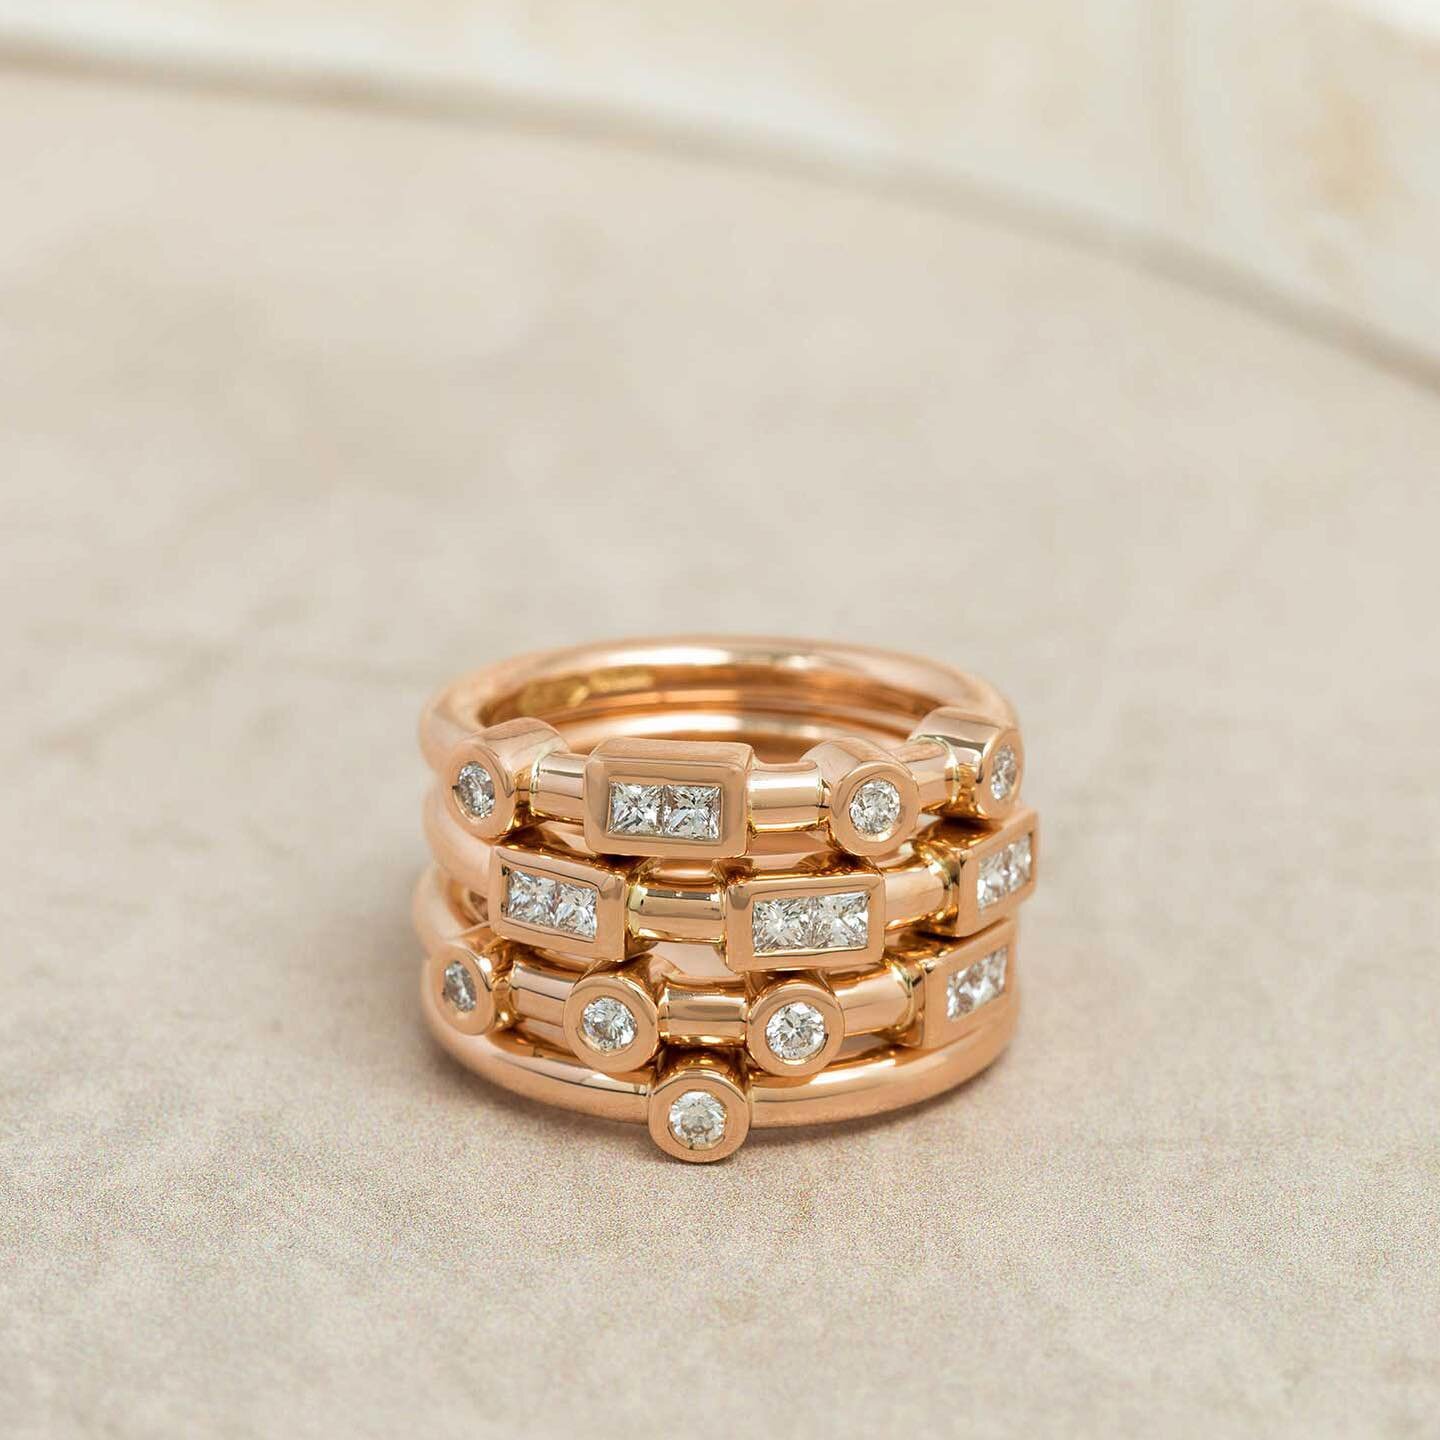 The ring stack of dreams 🤩💗!
.
What could be more swoon worthy that a glorious stack of personalised fine jewellery diamond rings in rose gold by @codebyedge 😍😍😍?? I just love the secret message in diamond morse code (how cool!).
.
I may have be